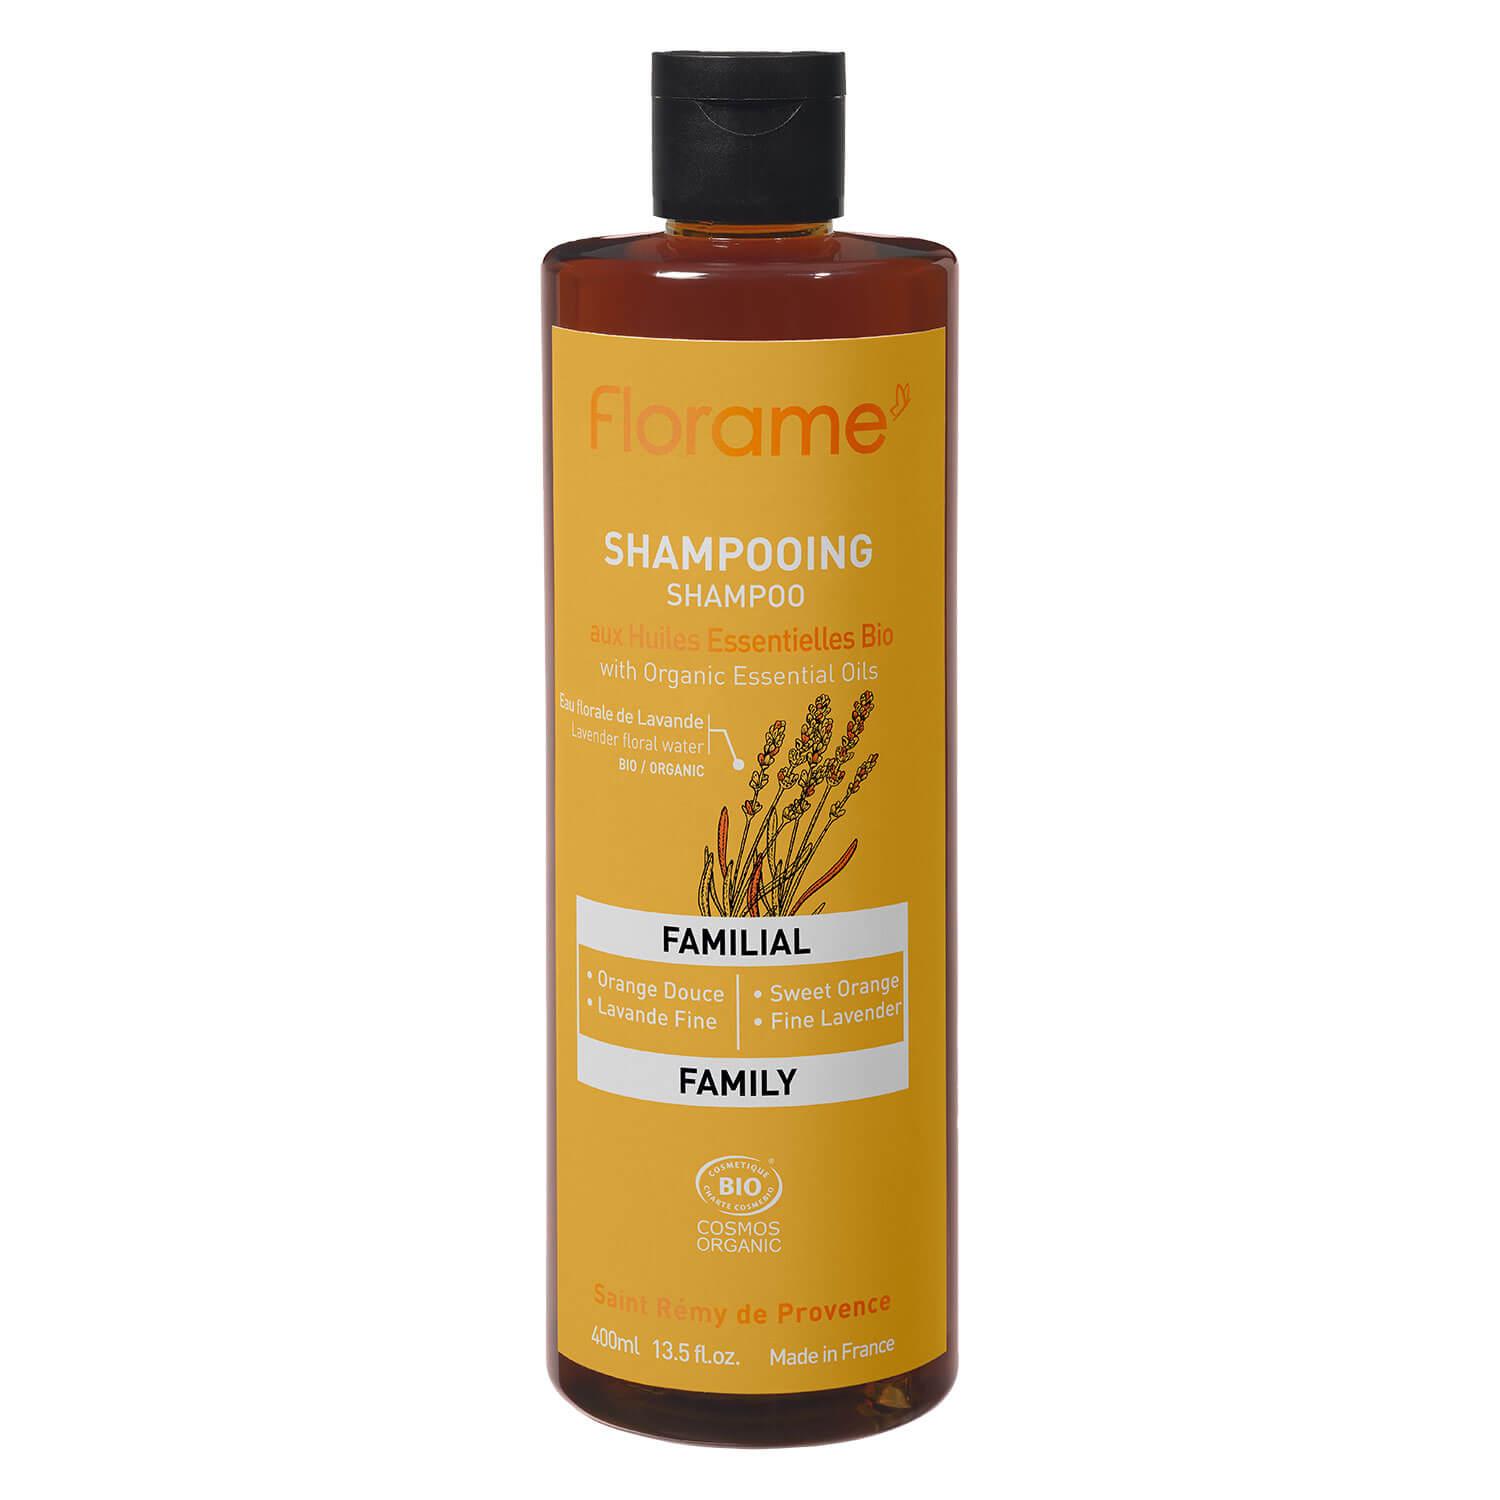 Florame - Shampooing Familial